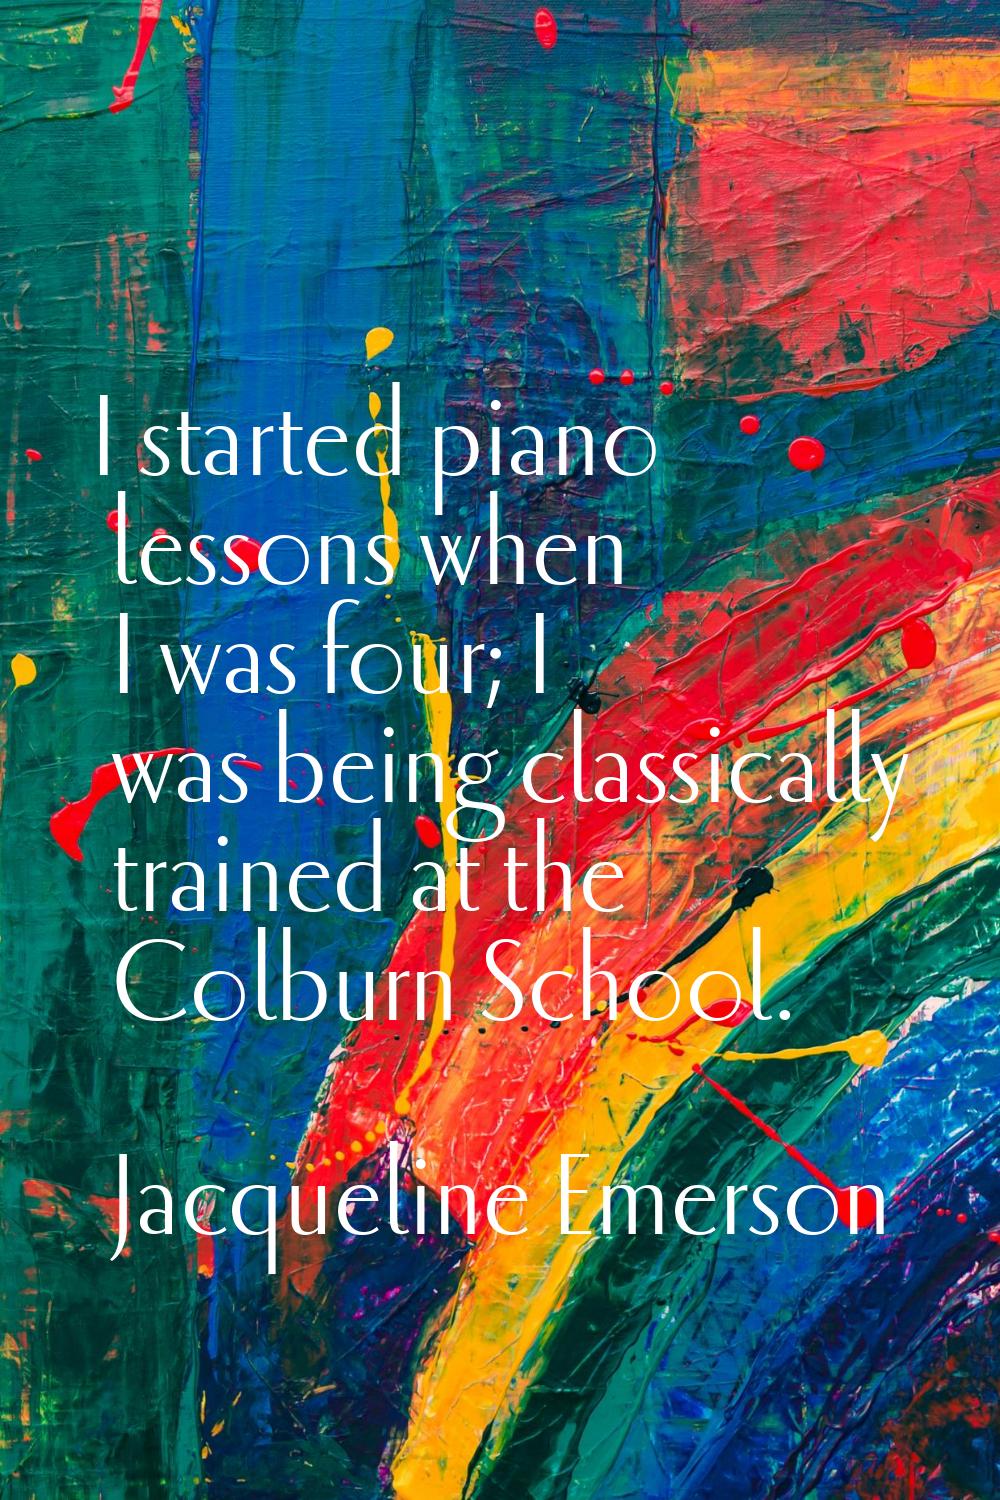 I started piano lessons when I was four; I was being classically trained at the Colburn School.